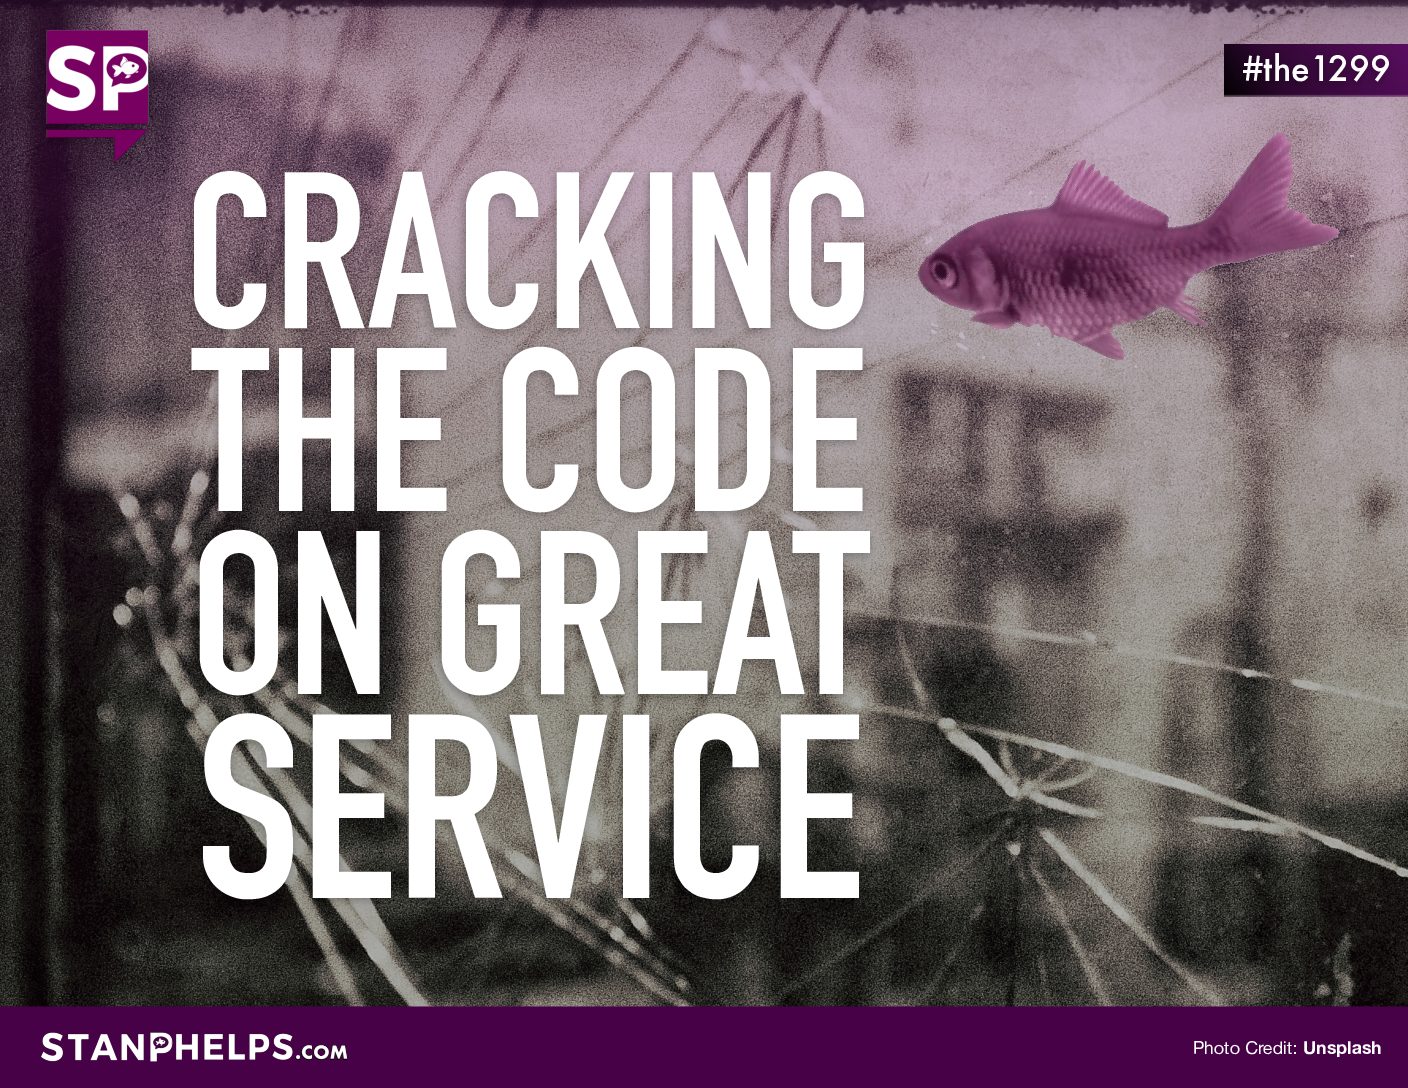 How do you differentiate good service from great service?